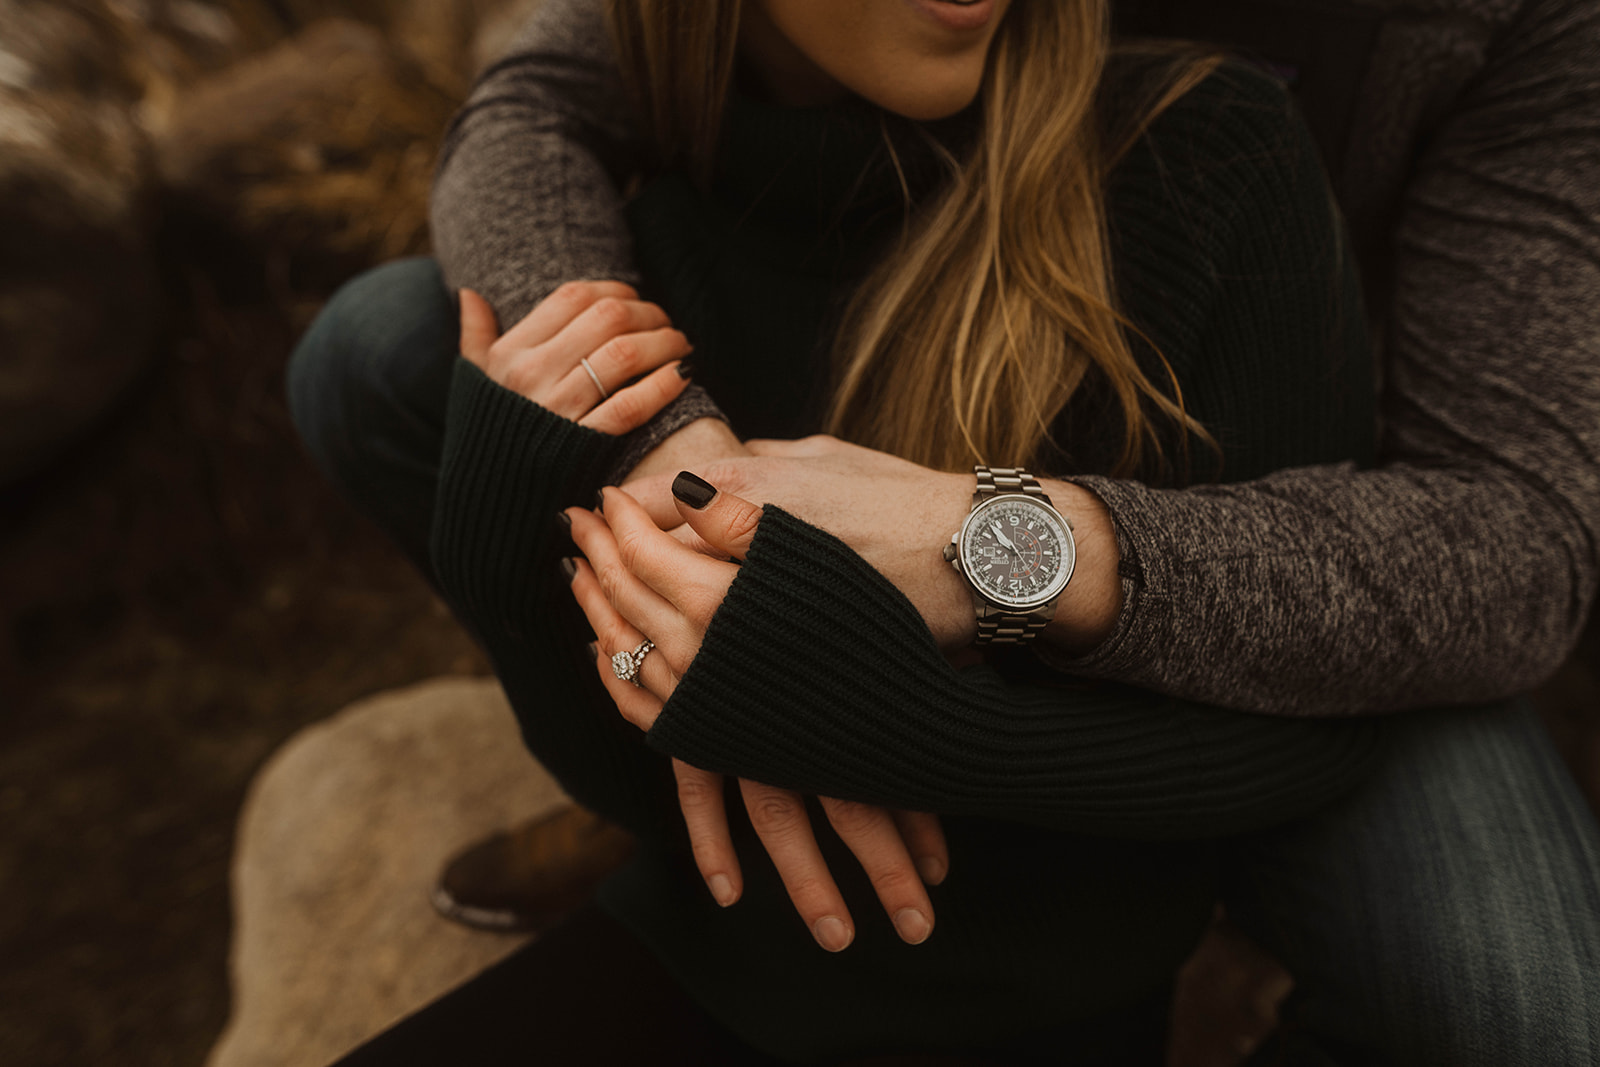 detail shots of watch and wedding rings during the payette river couple session